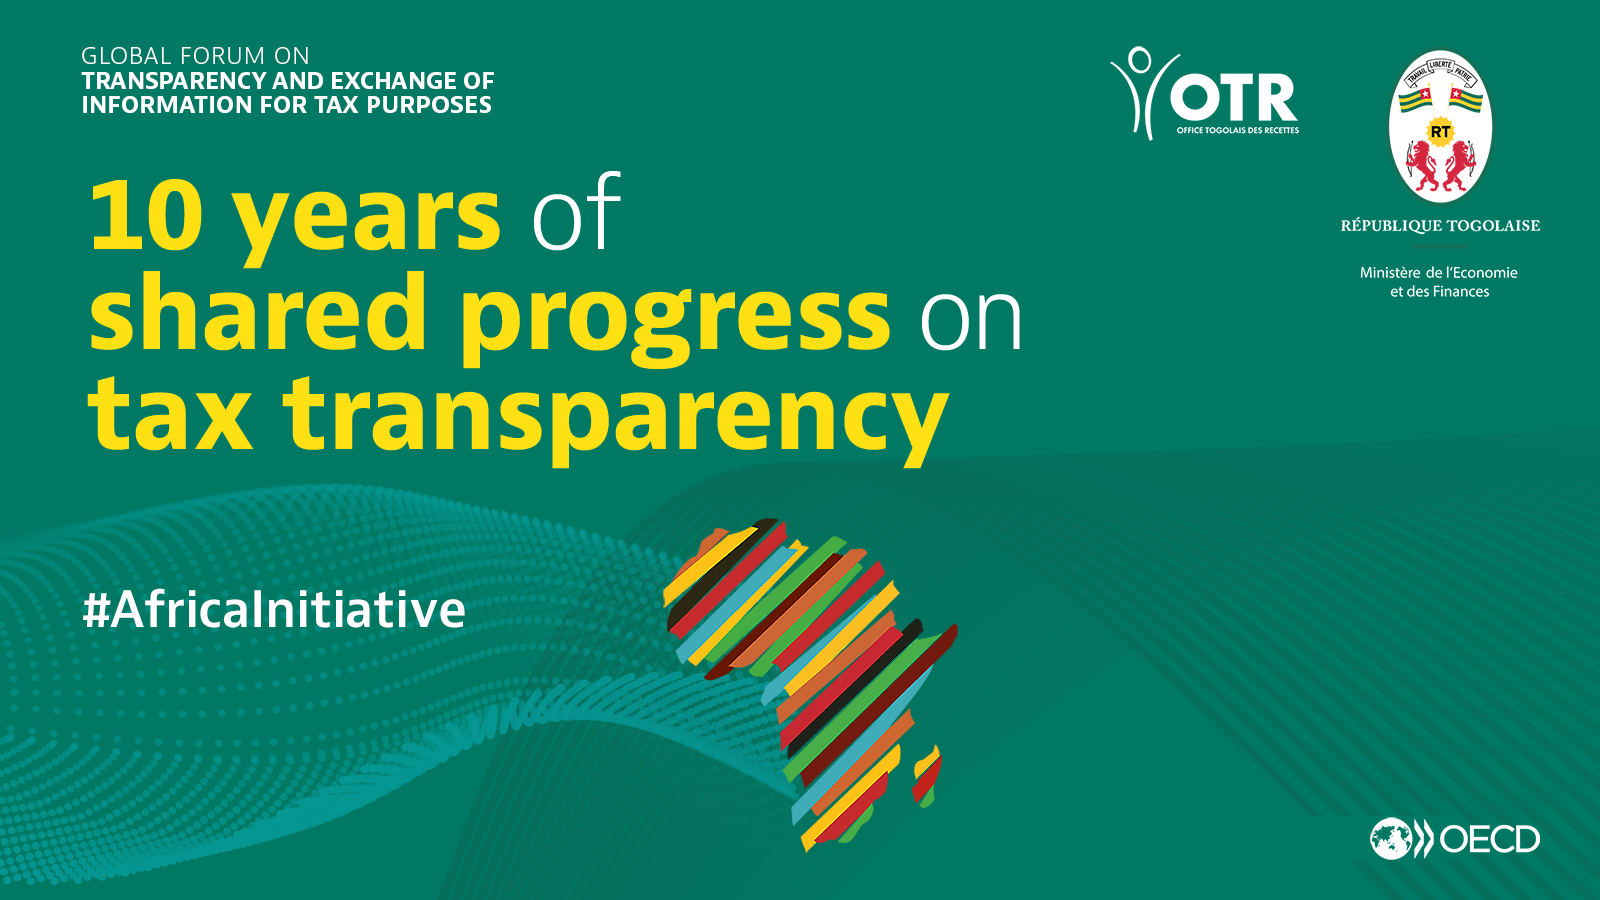 15th Meeting of the Africa Initiative: 10 years of shared progress on tax transparency